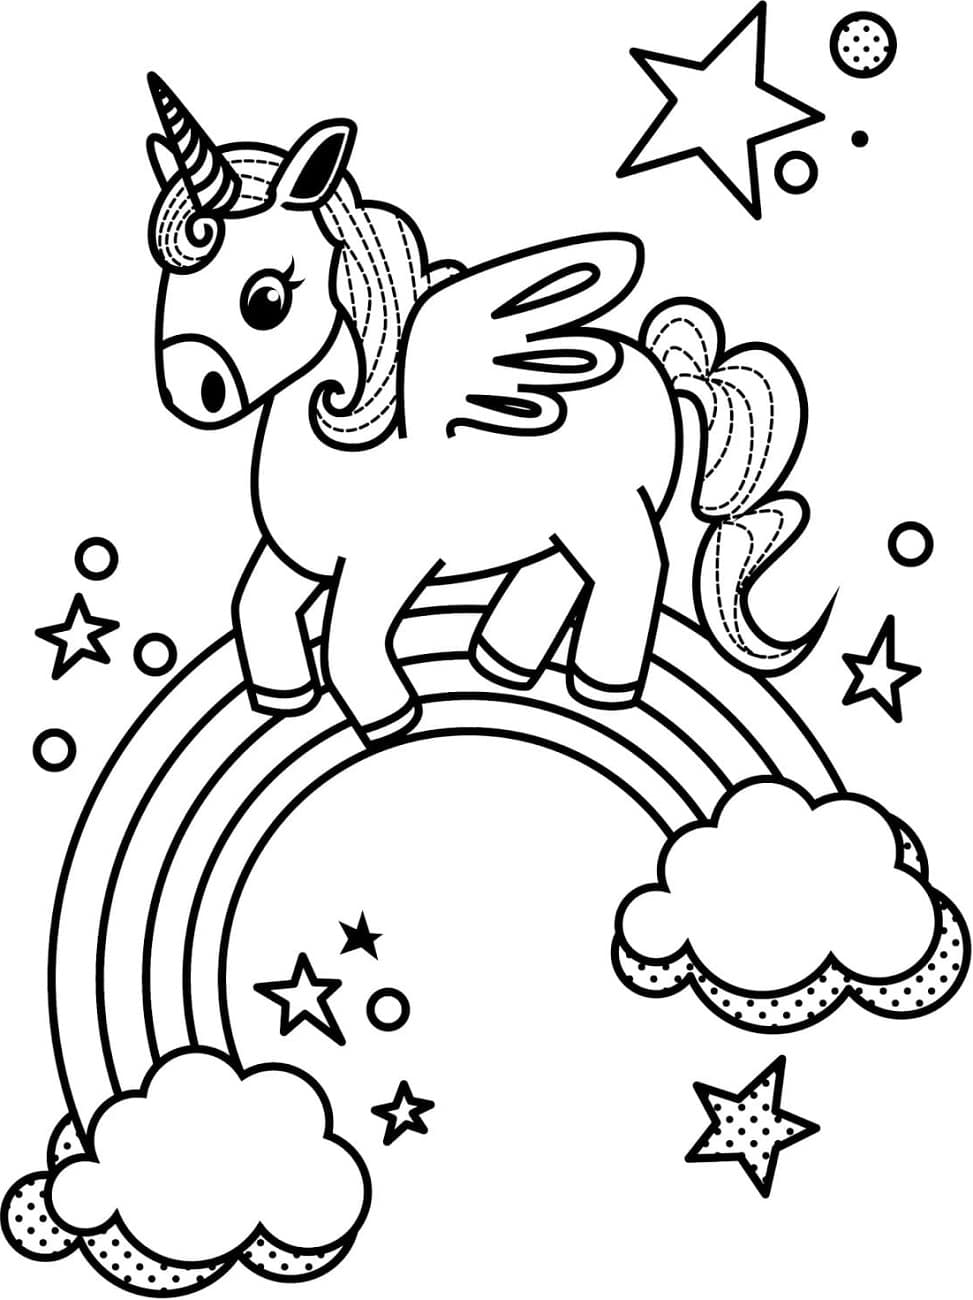 Little Unicorn And Rainbow Coloring Page - Free Printable Coloring